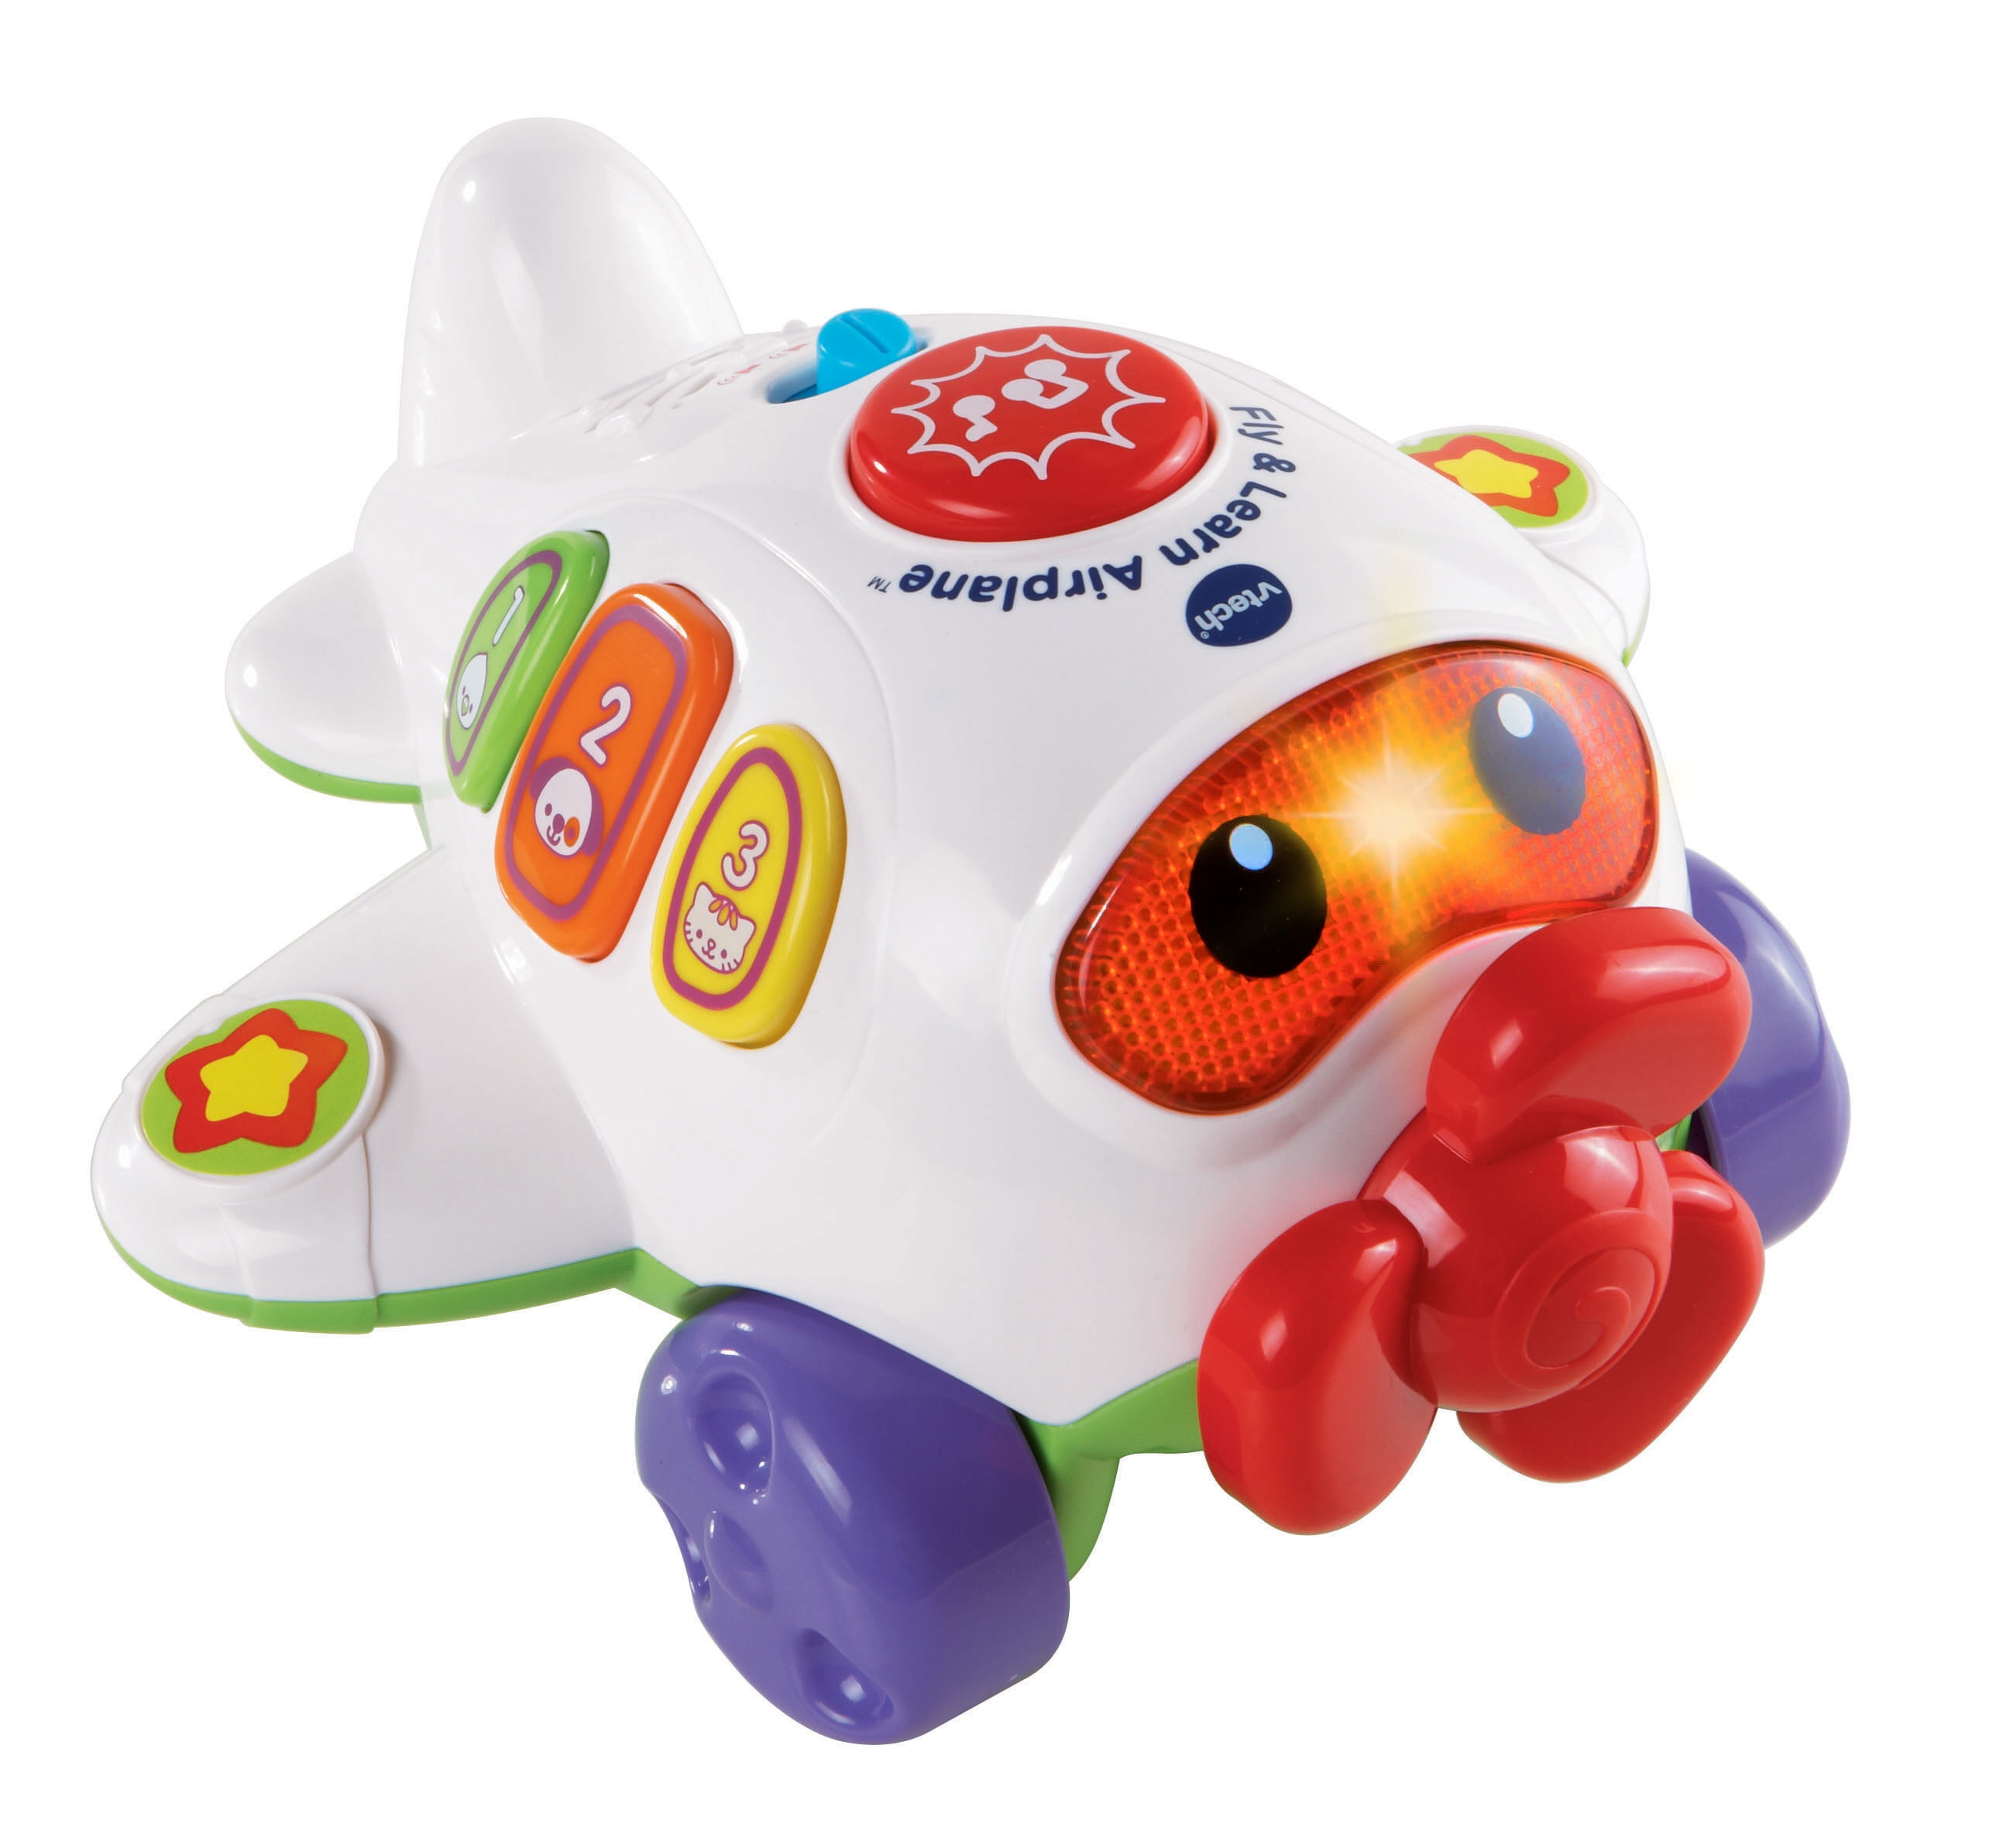 VTech Fly and Learn Airplane With Learning Phrases and Sing-Along